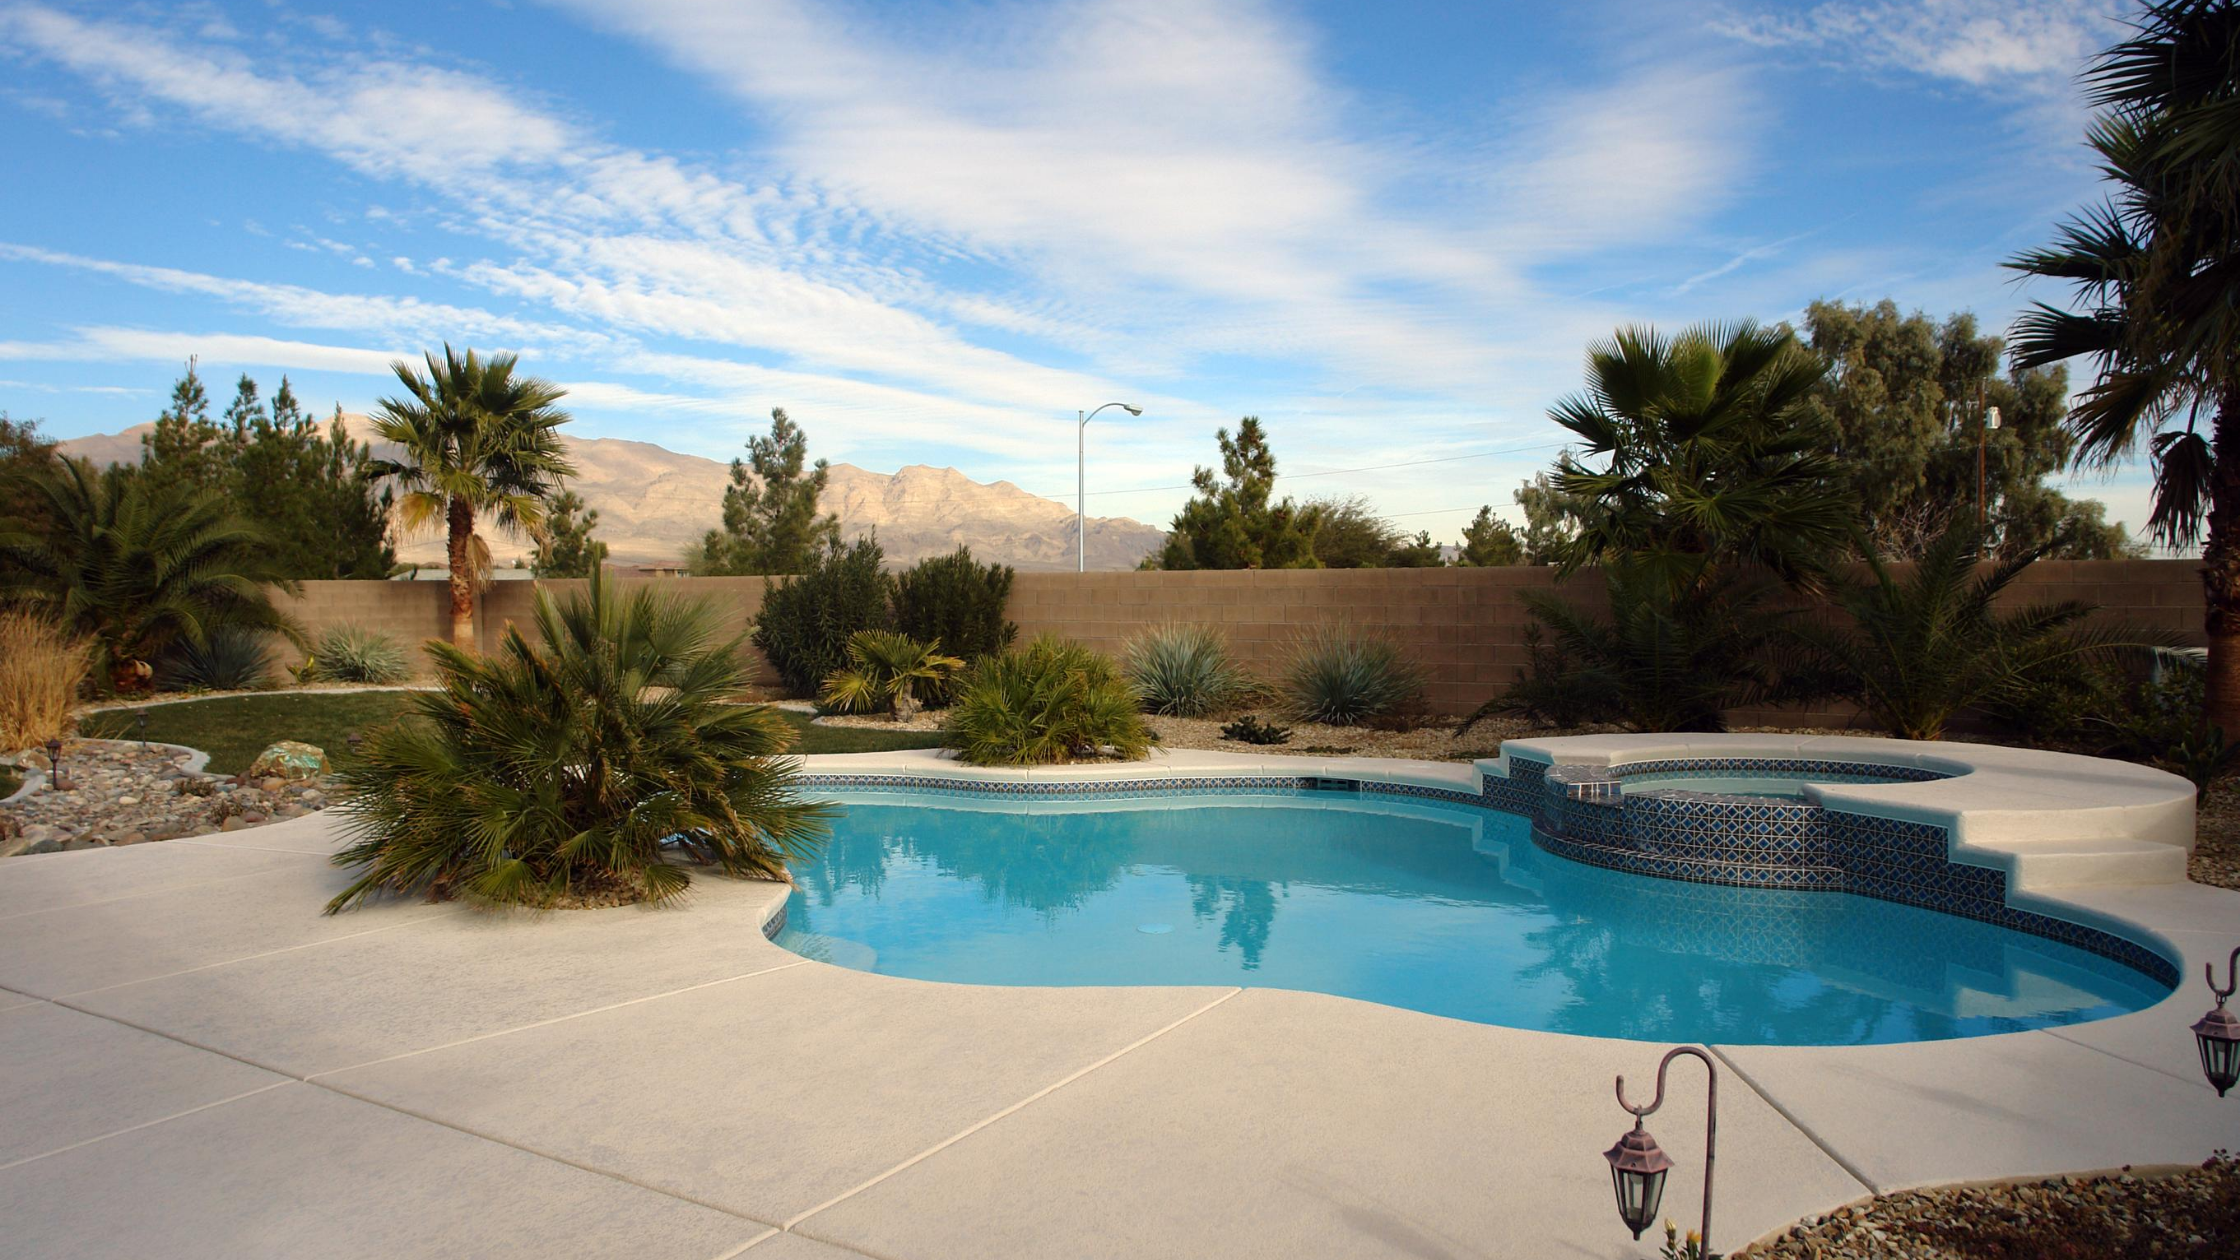 3 Things To Consider When Designing Pools In Seismic-Prone Areas